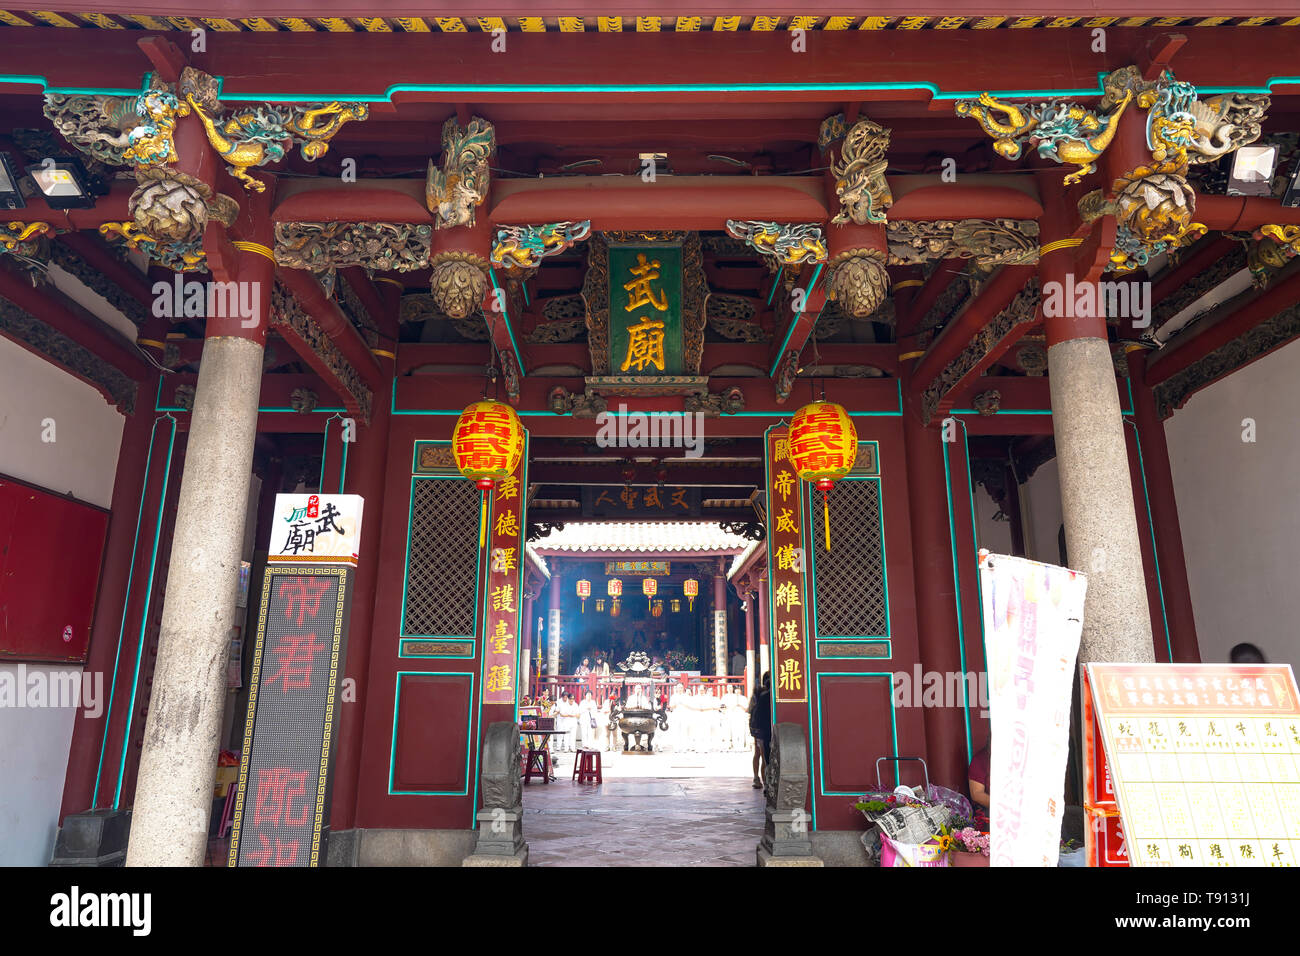 State Temple of the Martial God, also called Tainan Sacrificial Rites Martial Temple or Grand Guandi Temple, is a temple located in West Central Distr Stock Photo